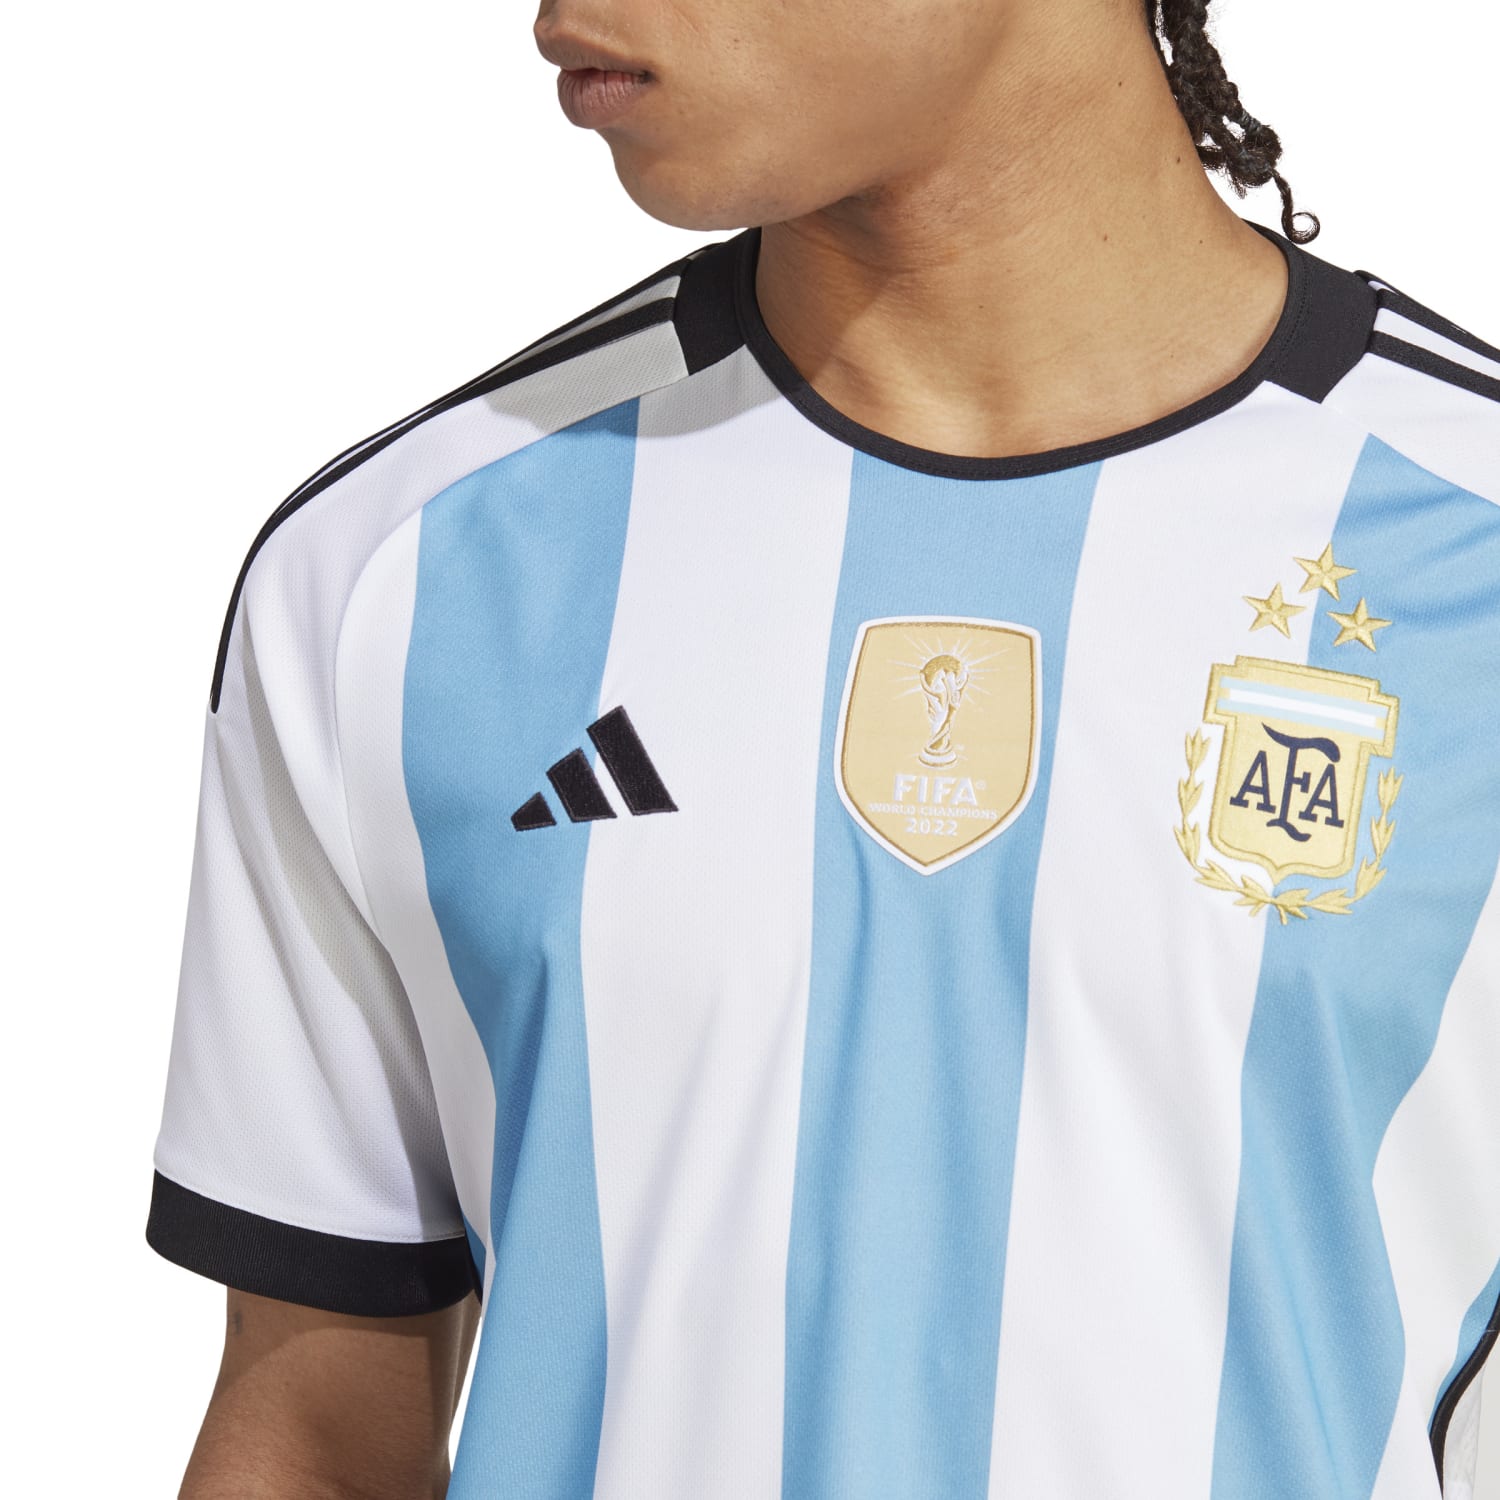 Adidas Mens Argentina 22 World Cup Champions Winners Home Soccer Jersey IB3597 - T-SHIRTS - Canada